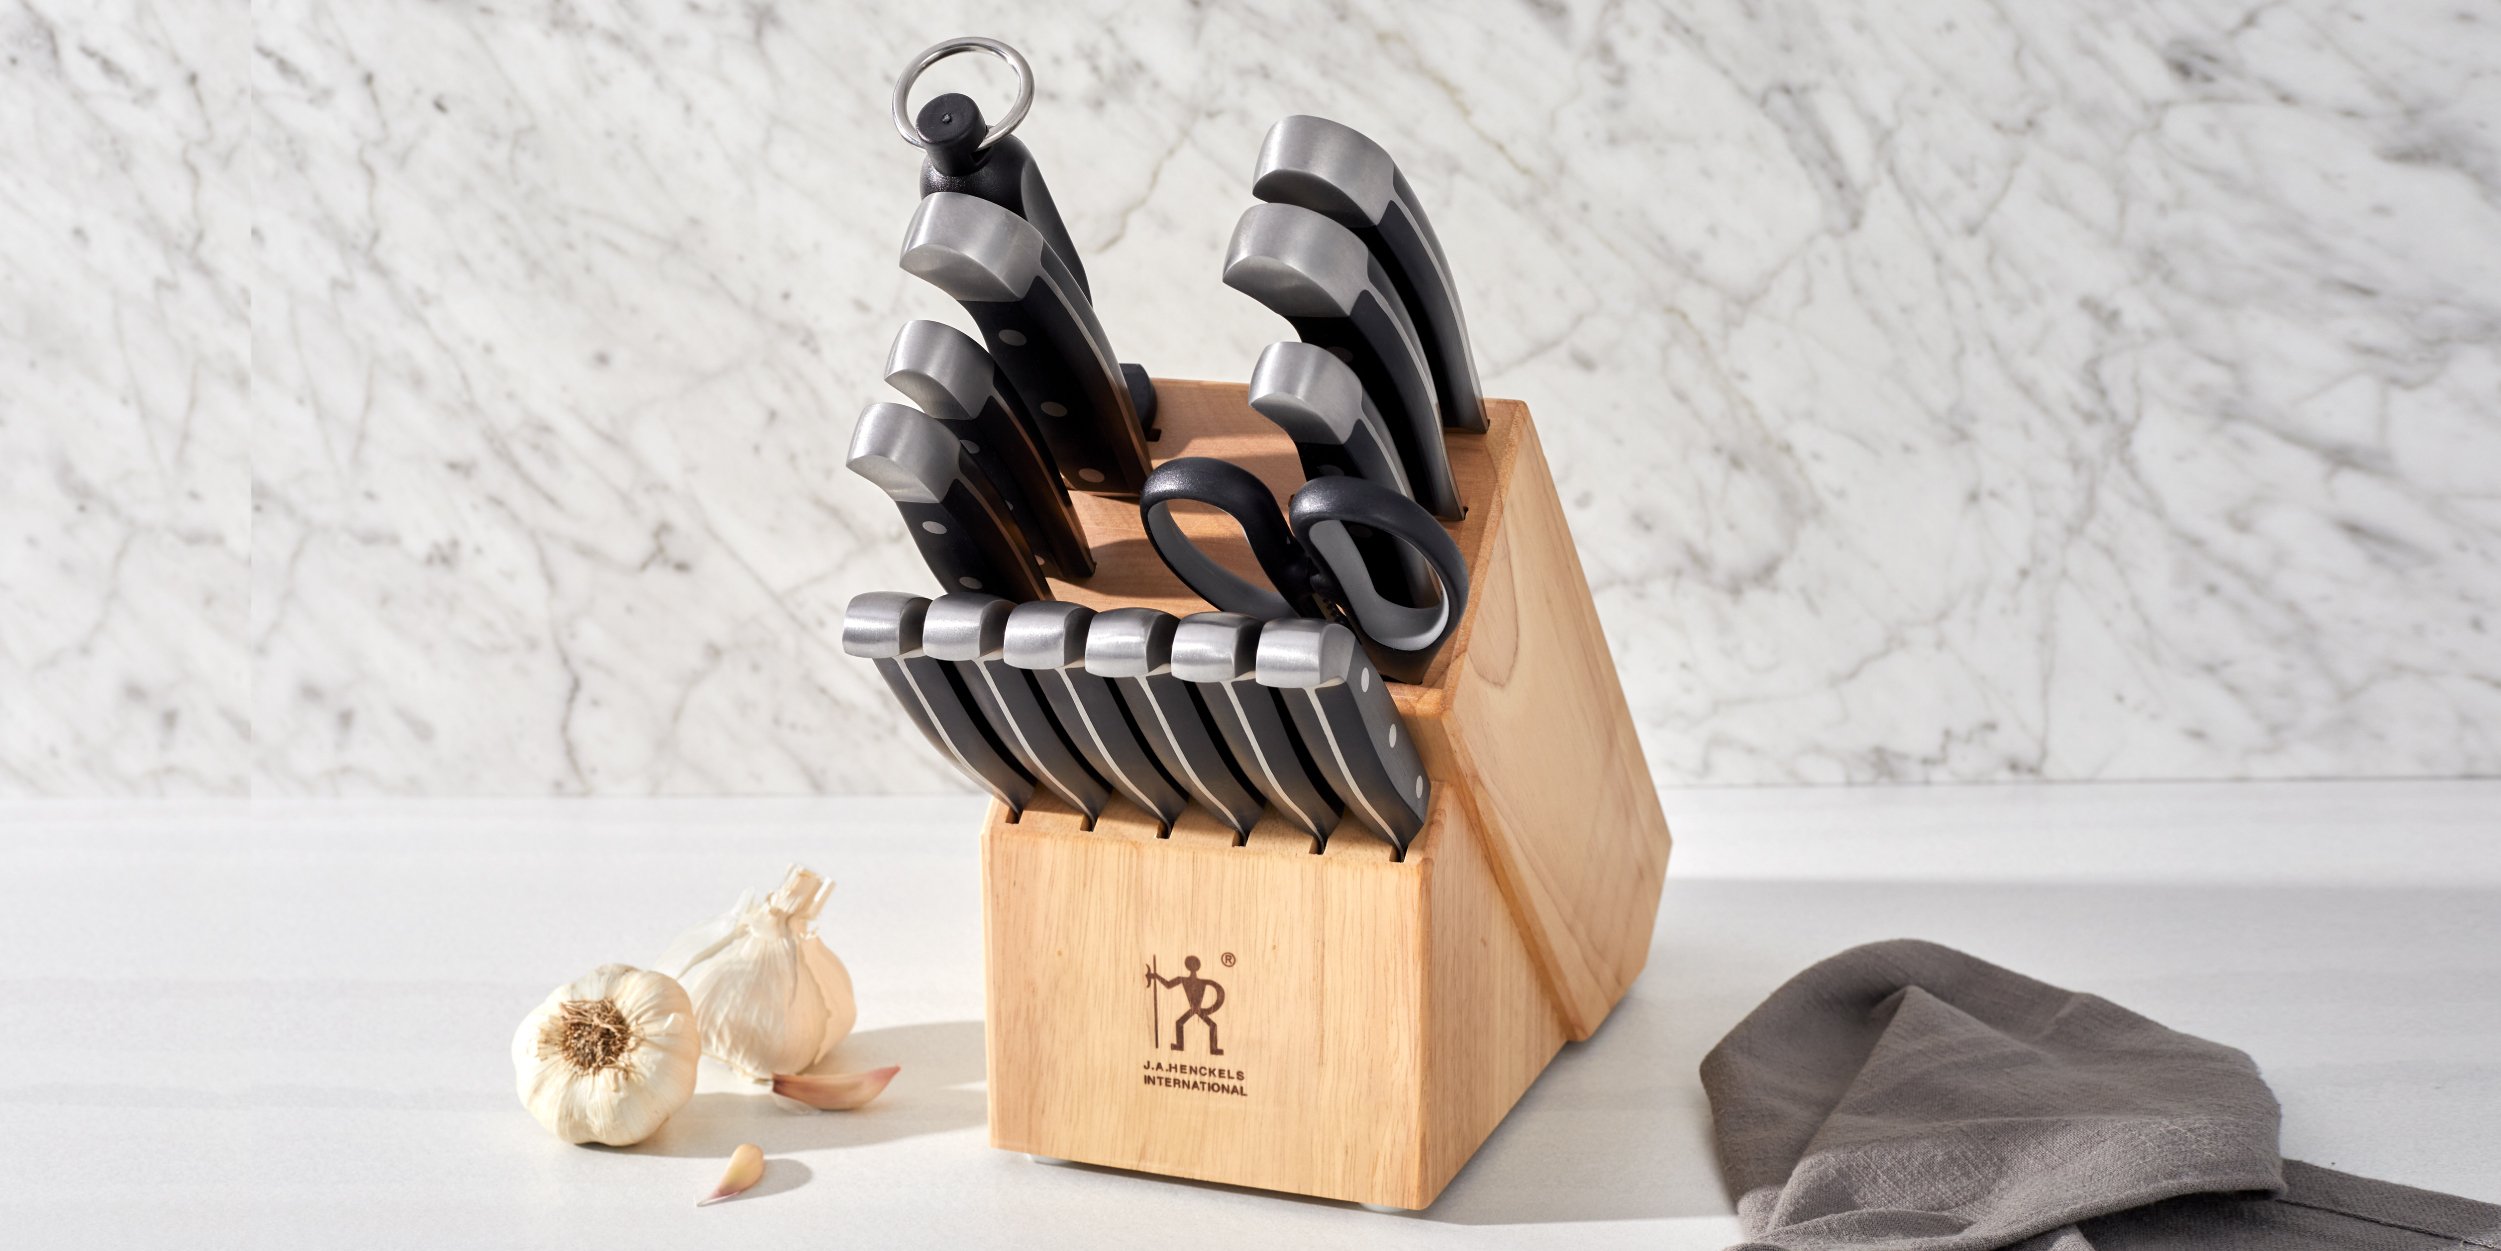 https://www.zwilling.com/on/demandware.static/-/Sites-zwilling-us-Library/default/dw0f08b66f/images/product-content/masonry-content/henckels/cutlery/Statement_Mason_Comp_HE_Statement_Masonry_1200x600_Main.jpg